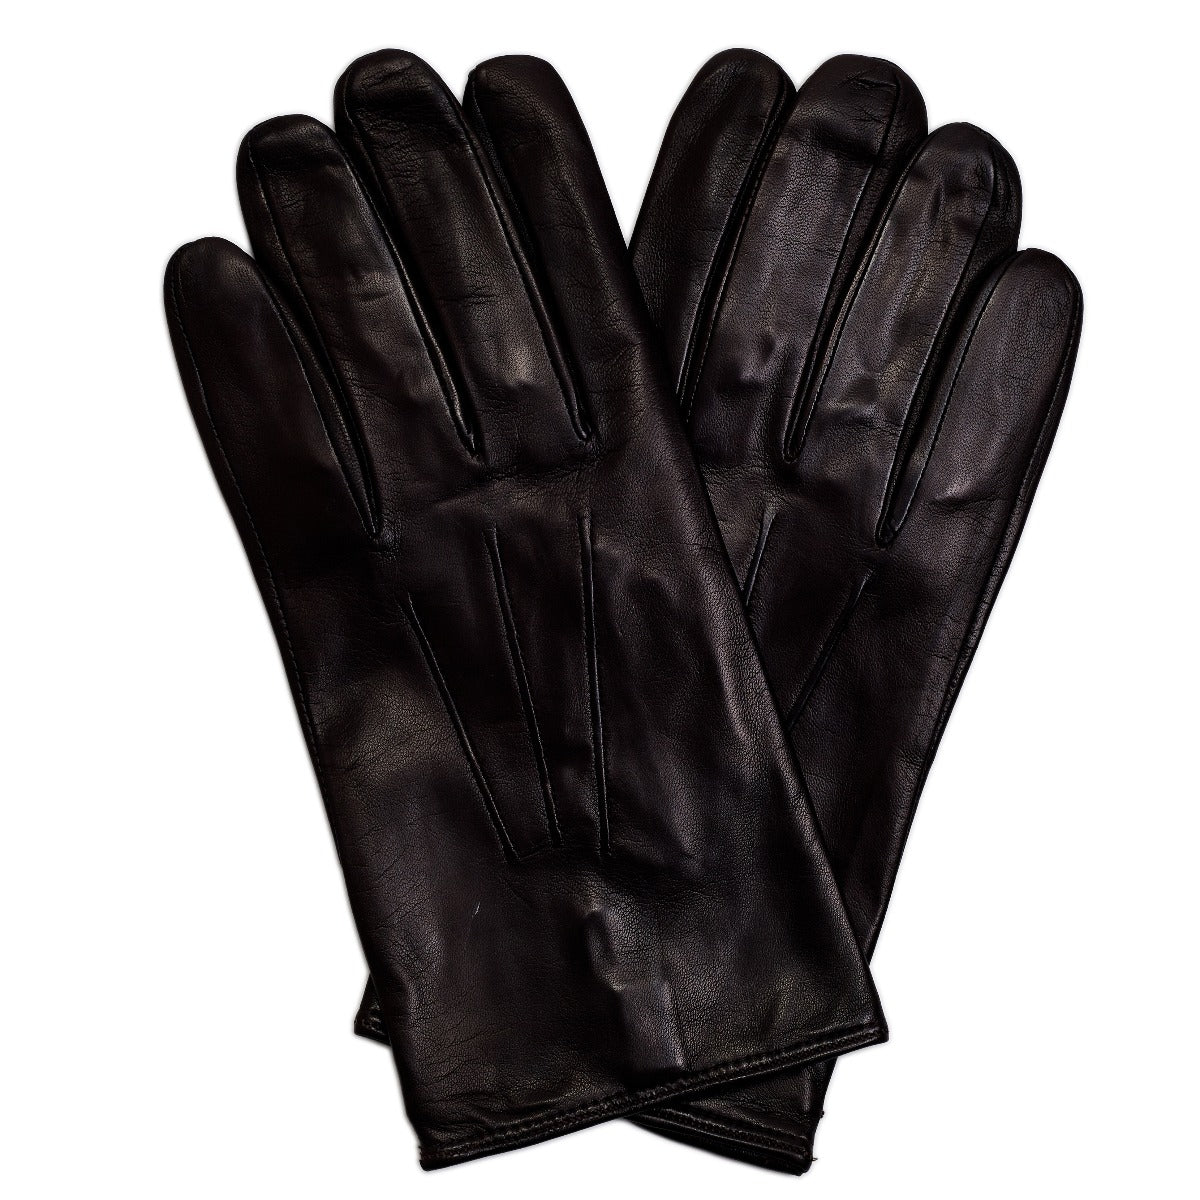 A pair of ultra-soft KirbyAllison.com Sovereign Grade Dark Brown Nappa Leather Gloves, Silk Lined on a white background.